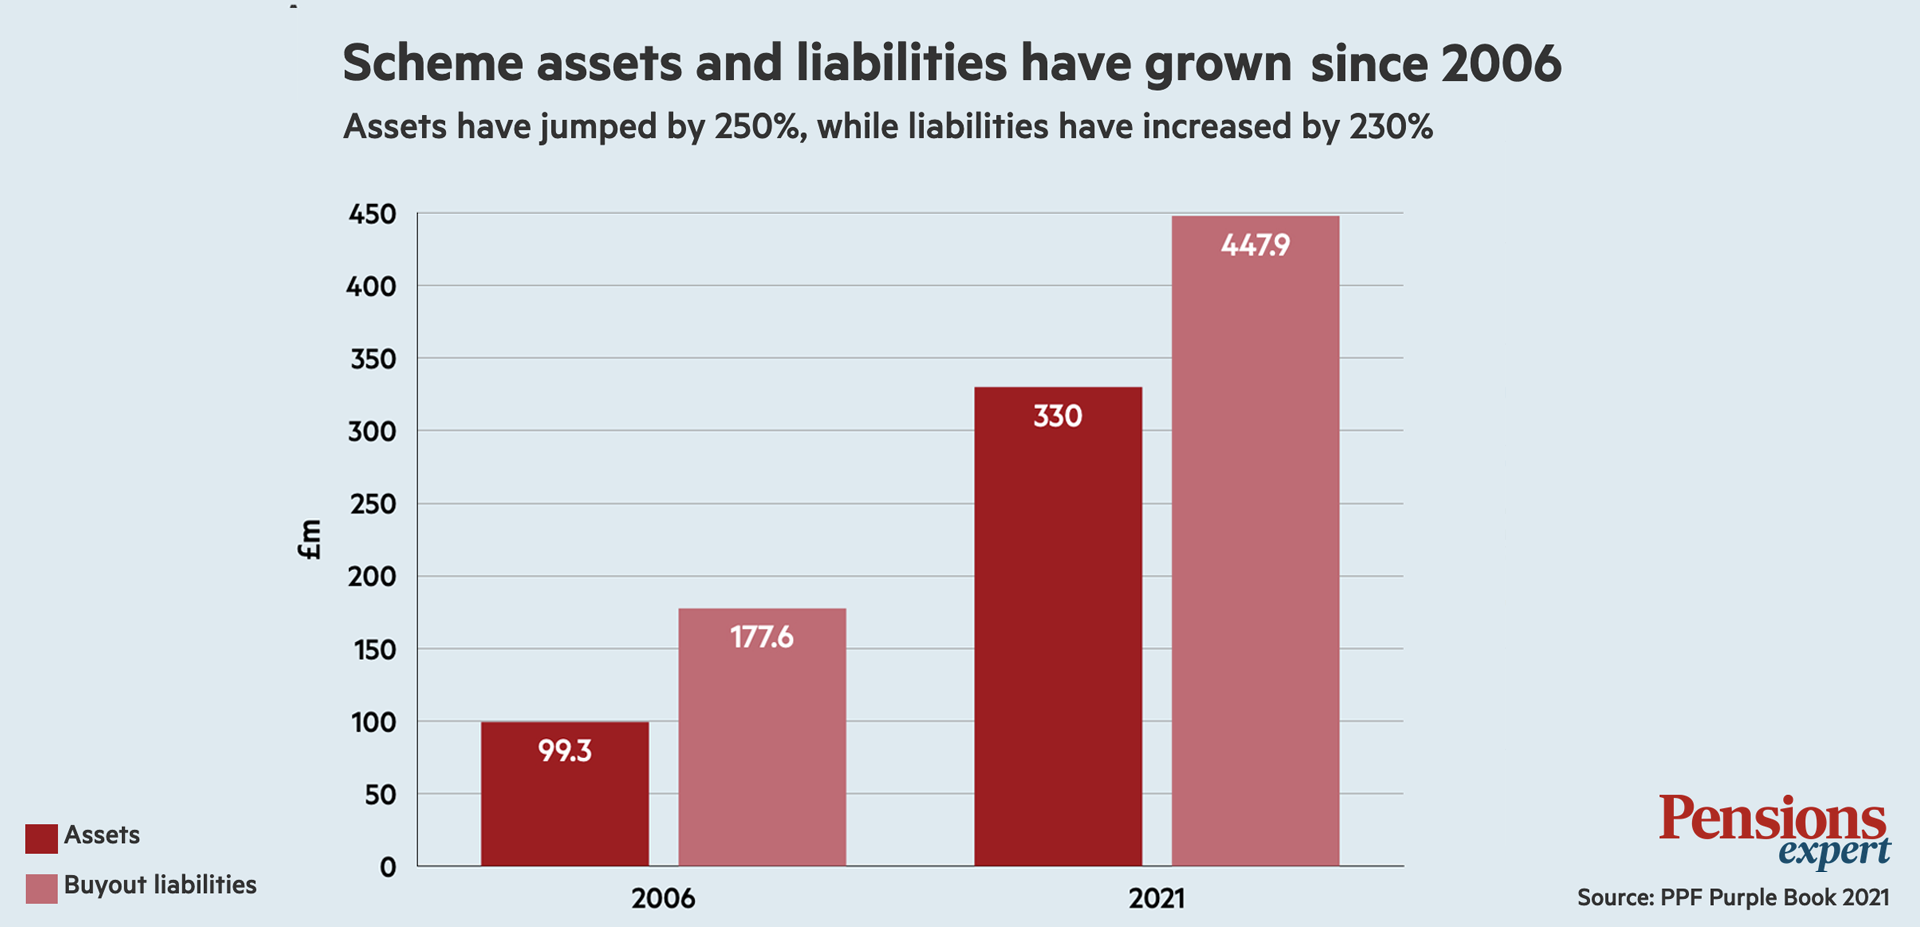 Scheme assets and liabilities have grown since 2006